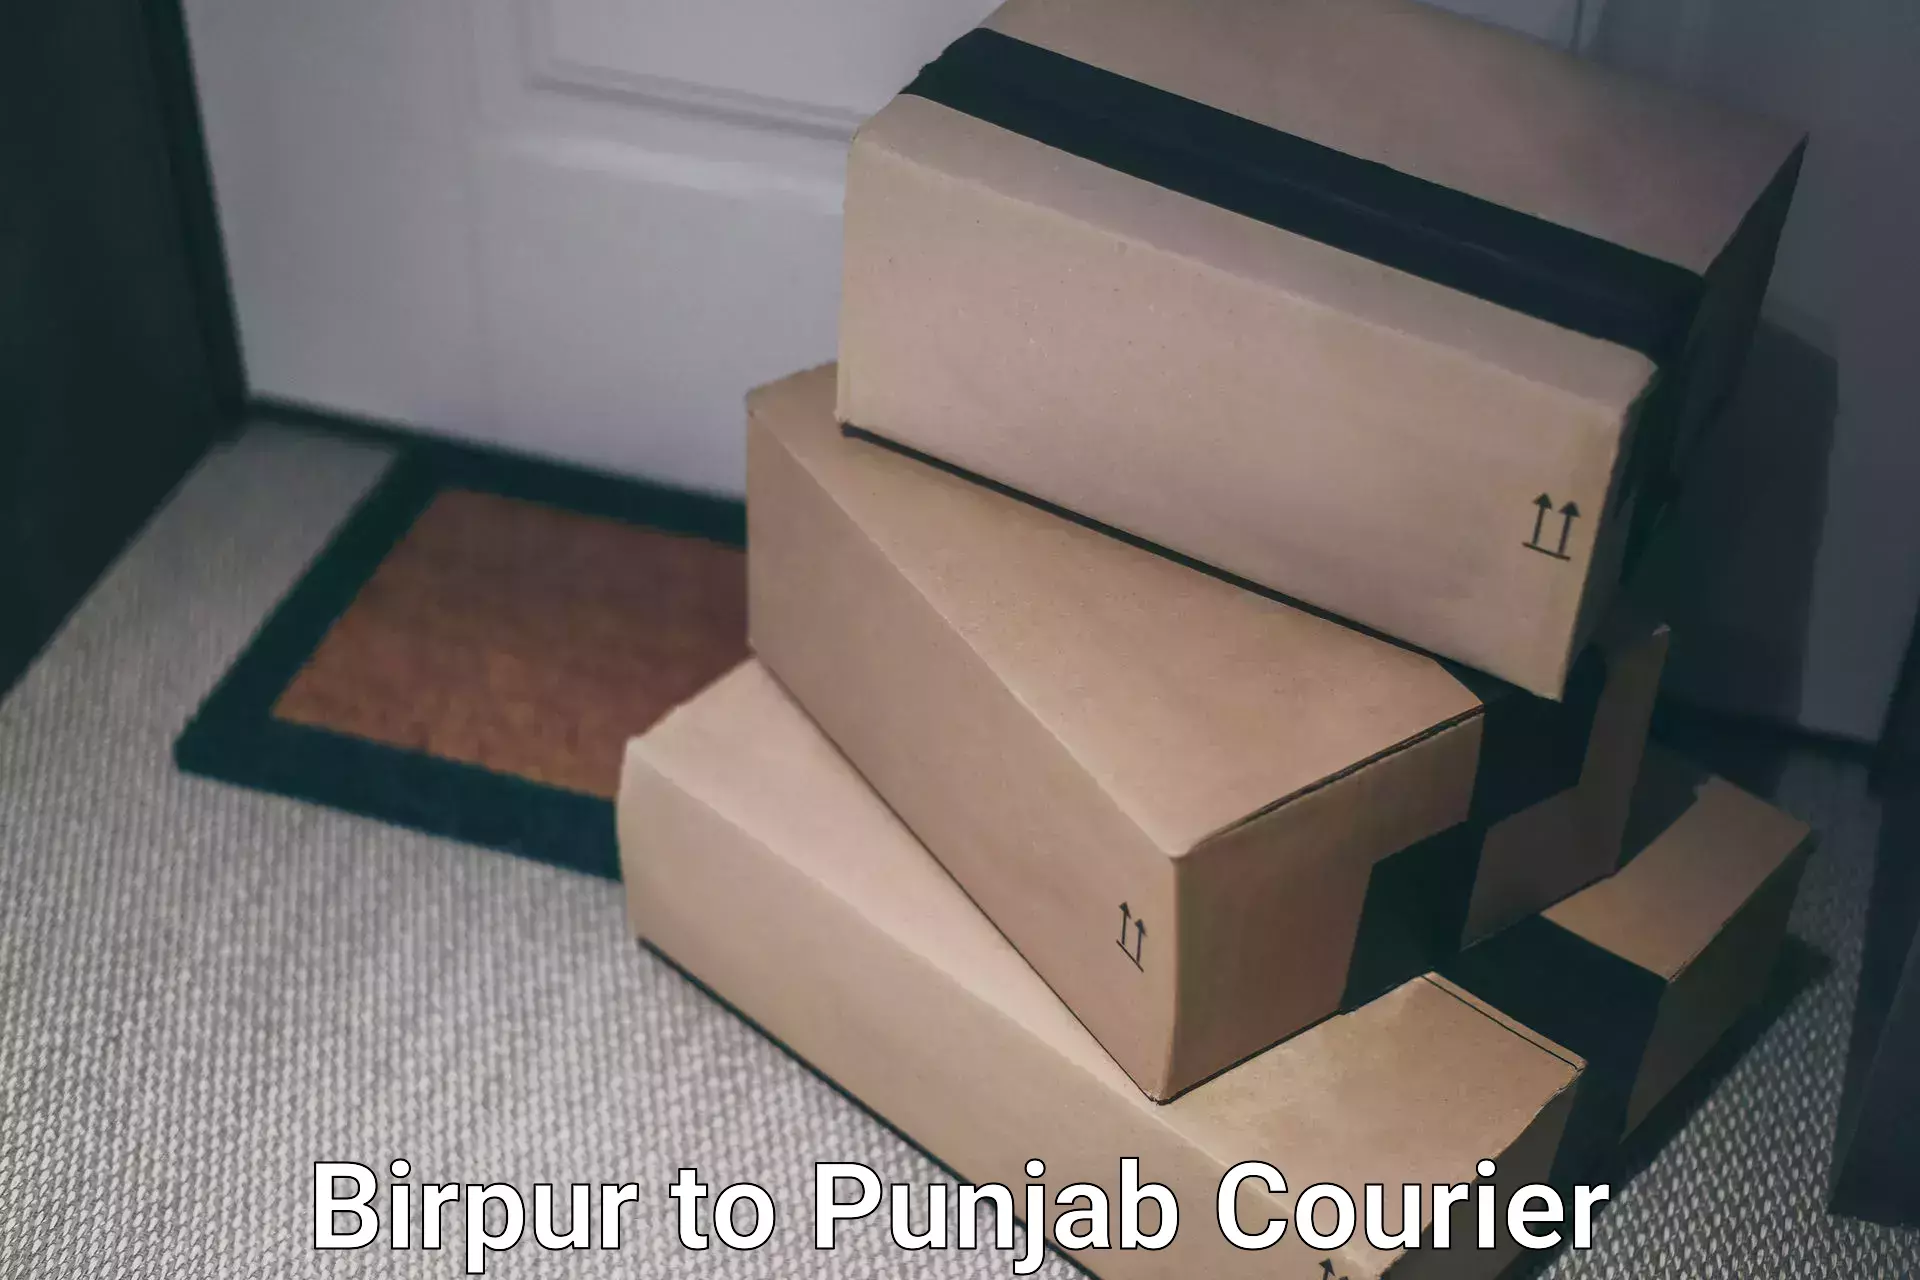 Customized delivery options Birpur to Mohali